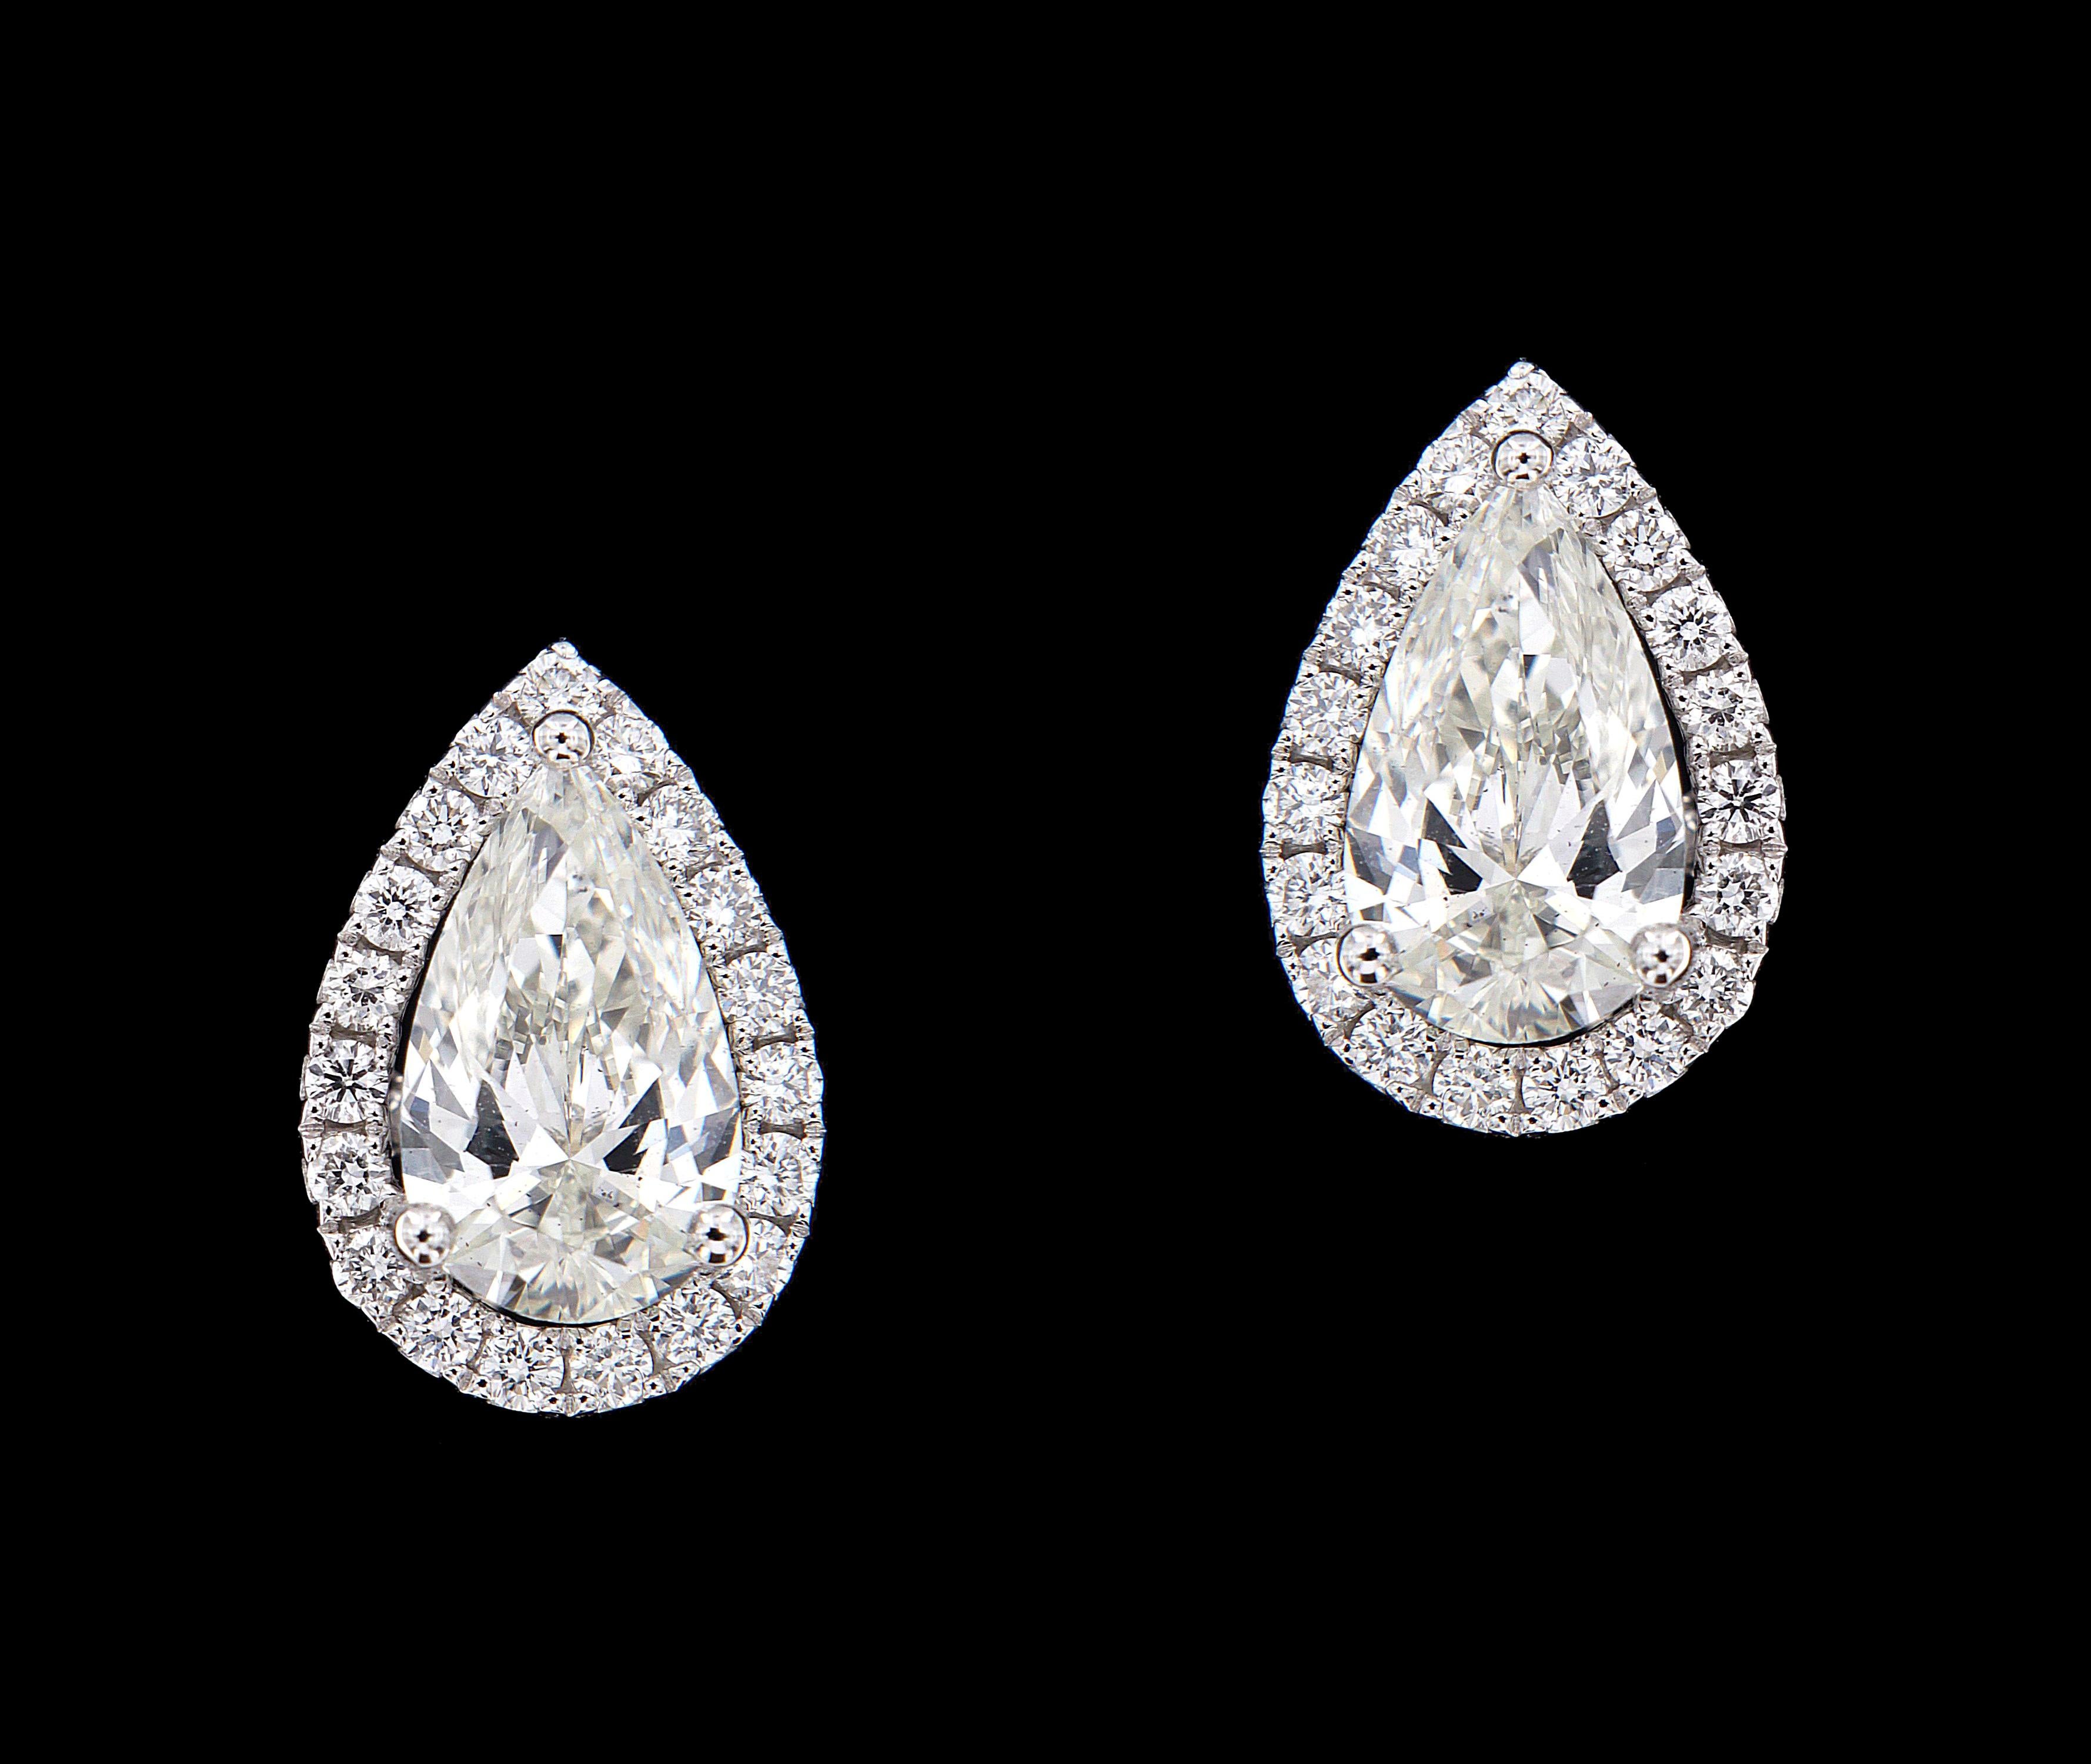 18 Karat White Gold and Diamond in Pear Shaped Earrings.

Diamonds of approximately 1.774 carats and mounted on 18 karats white gold earrings. The earrings weigh approximately 3.135 grams.

Please note: The charges specified do not include any